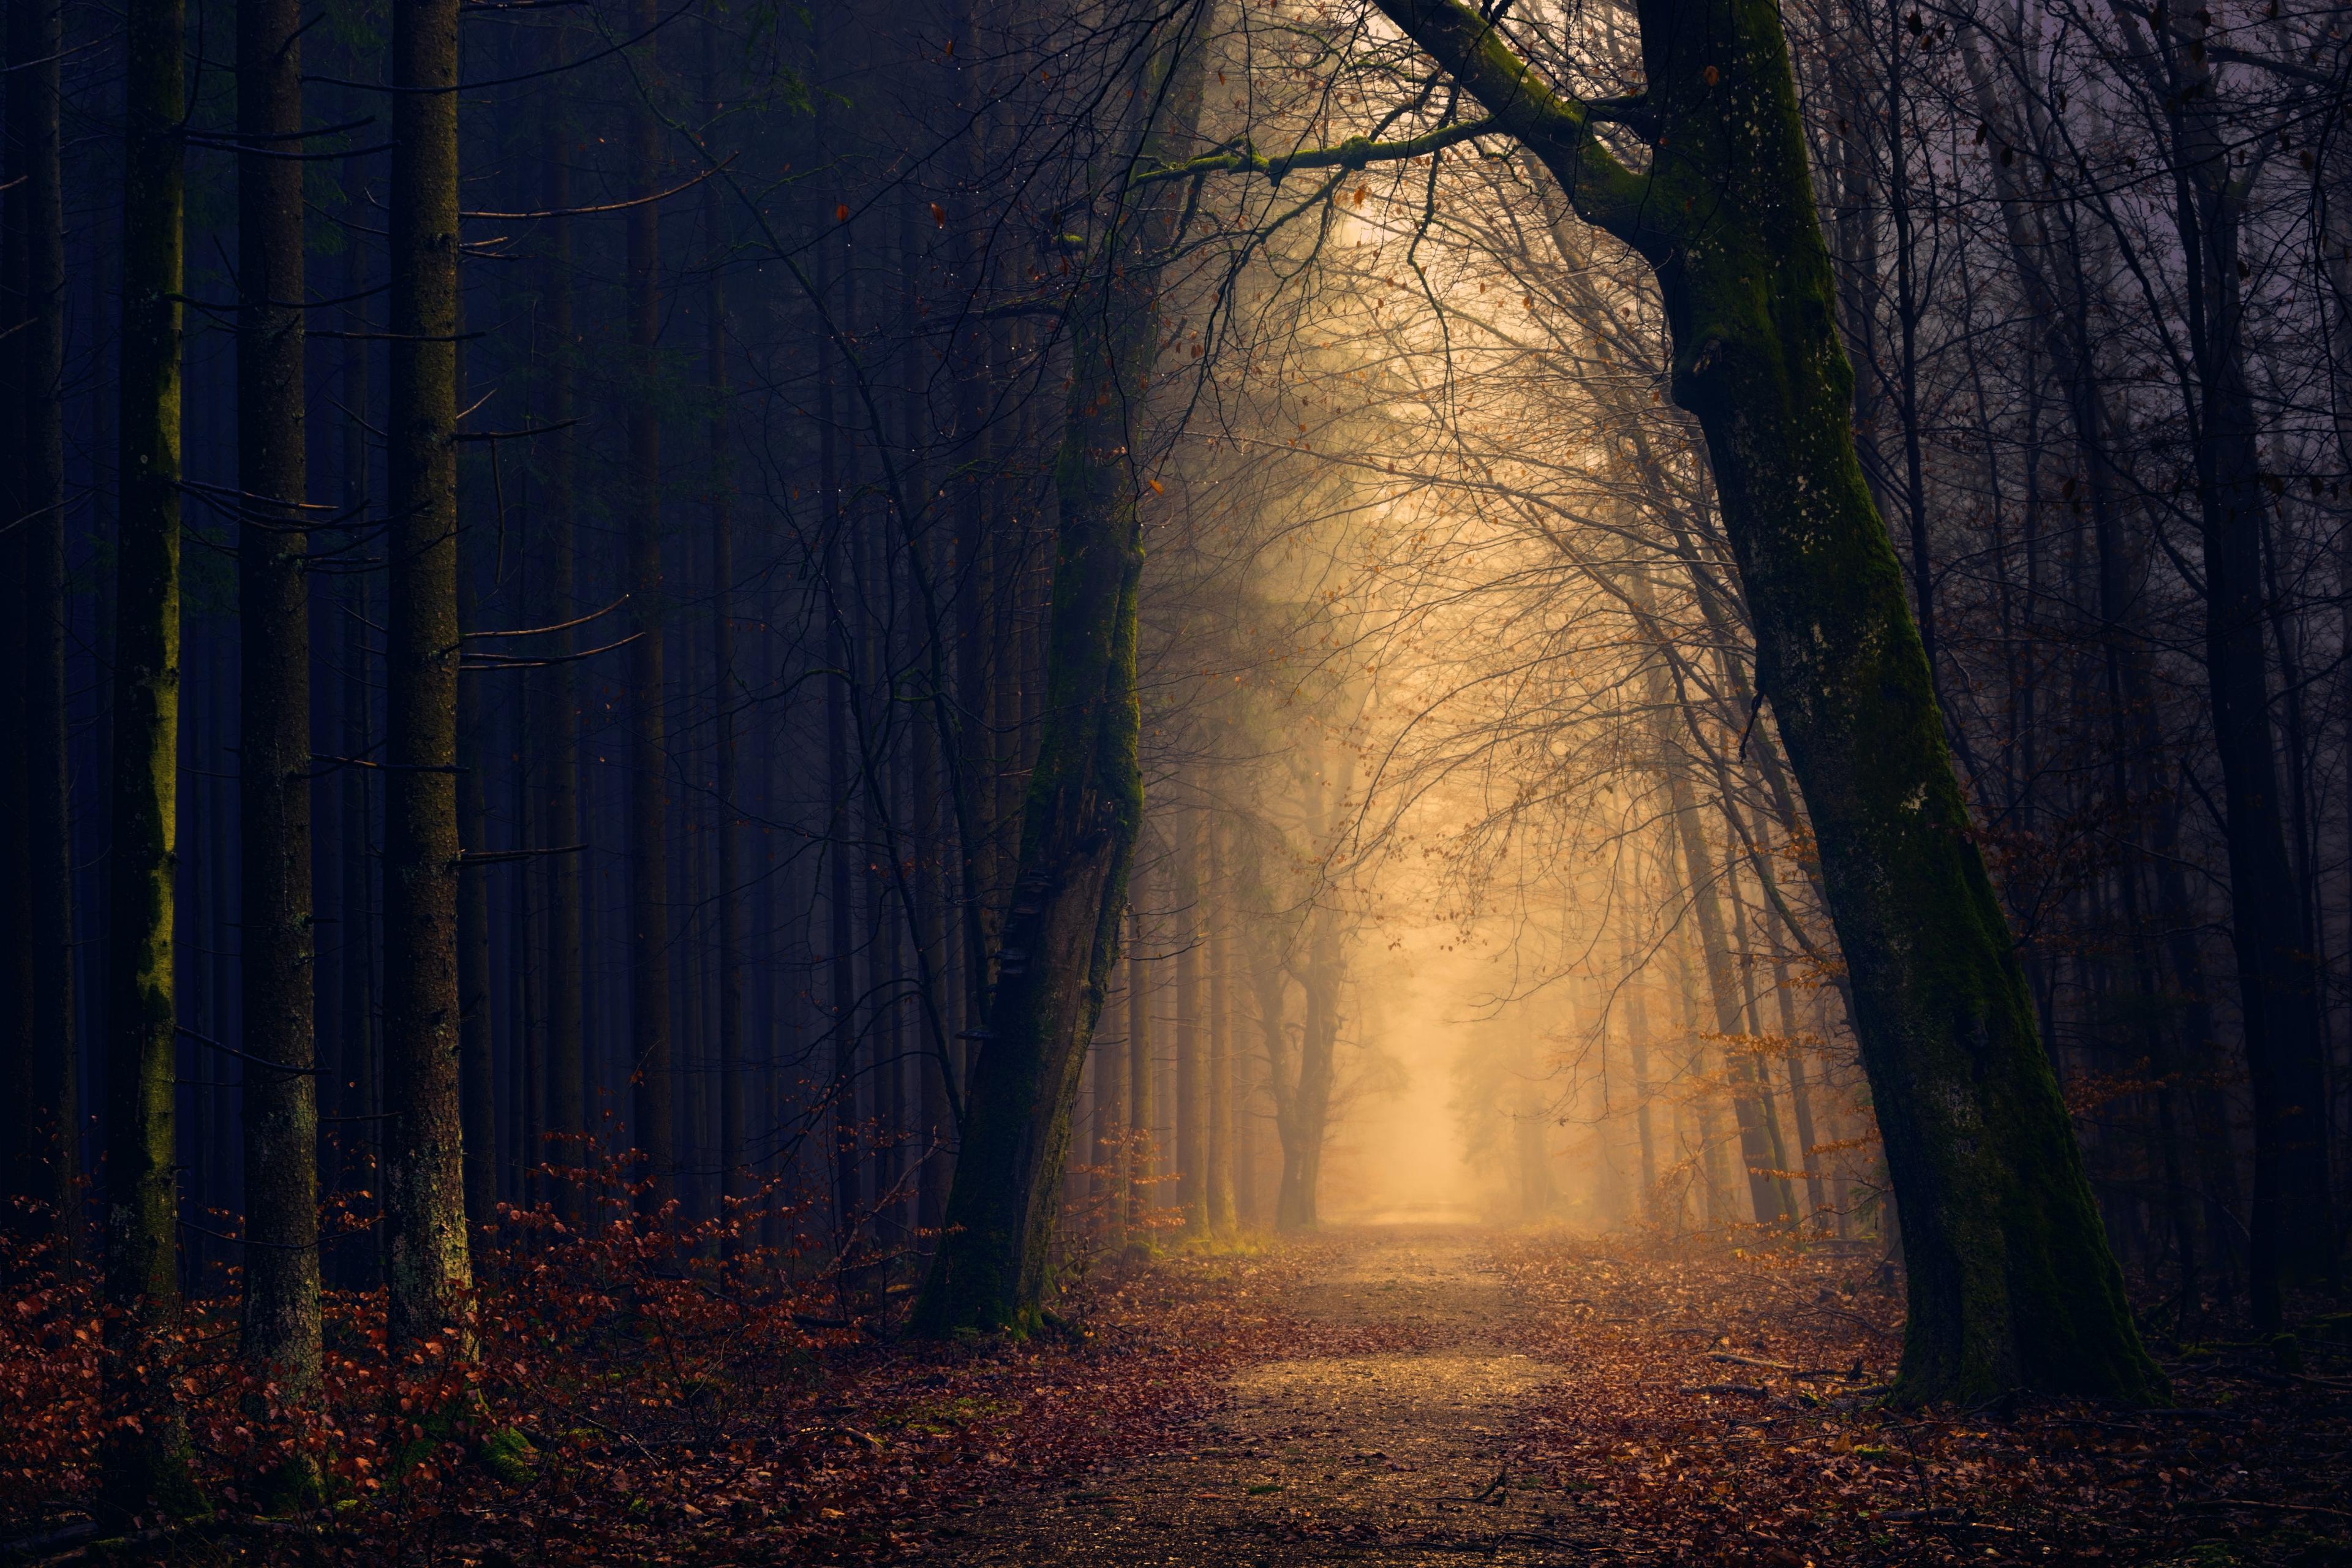 In a shadowed forest, a path through the trees is bathed in golden light.